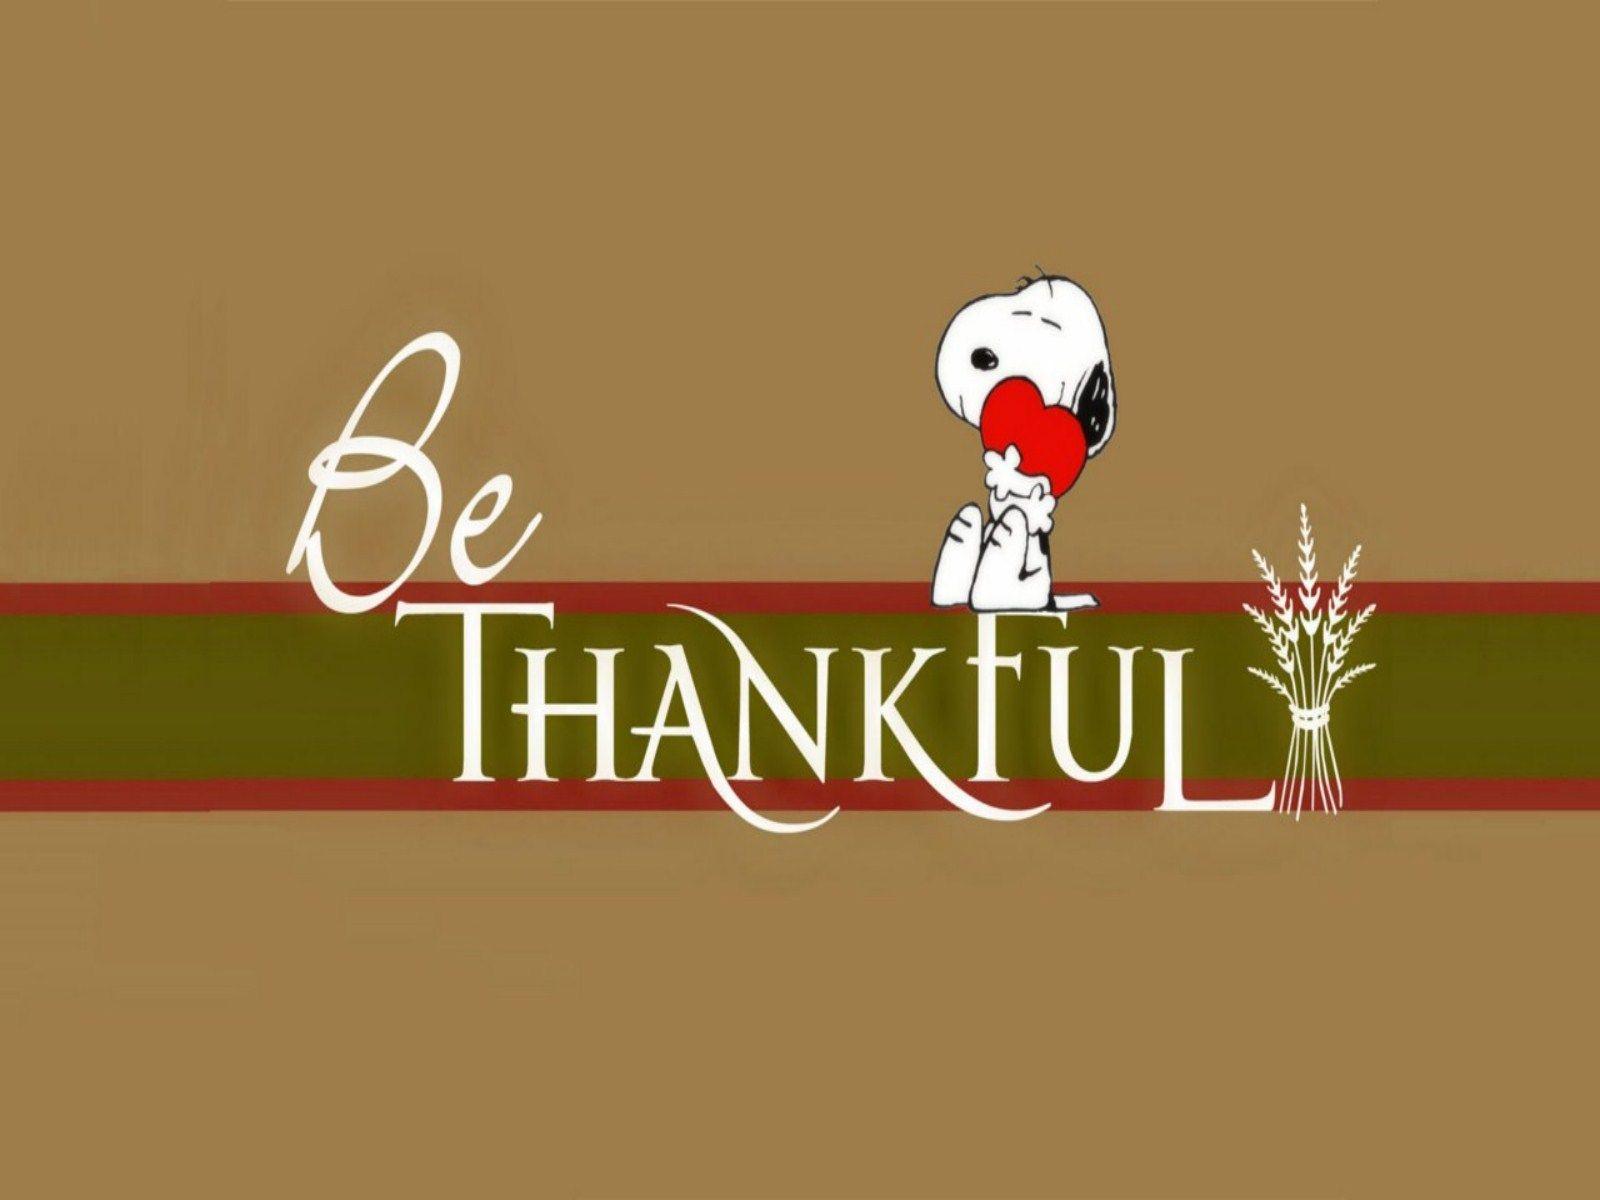 thanks giving image for facebook wallpaper picture HD